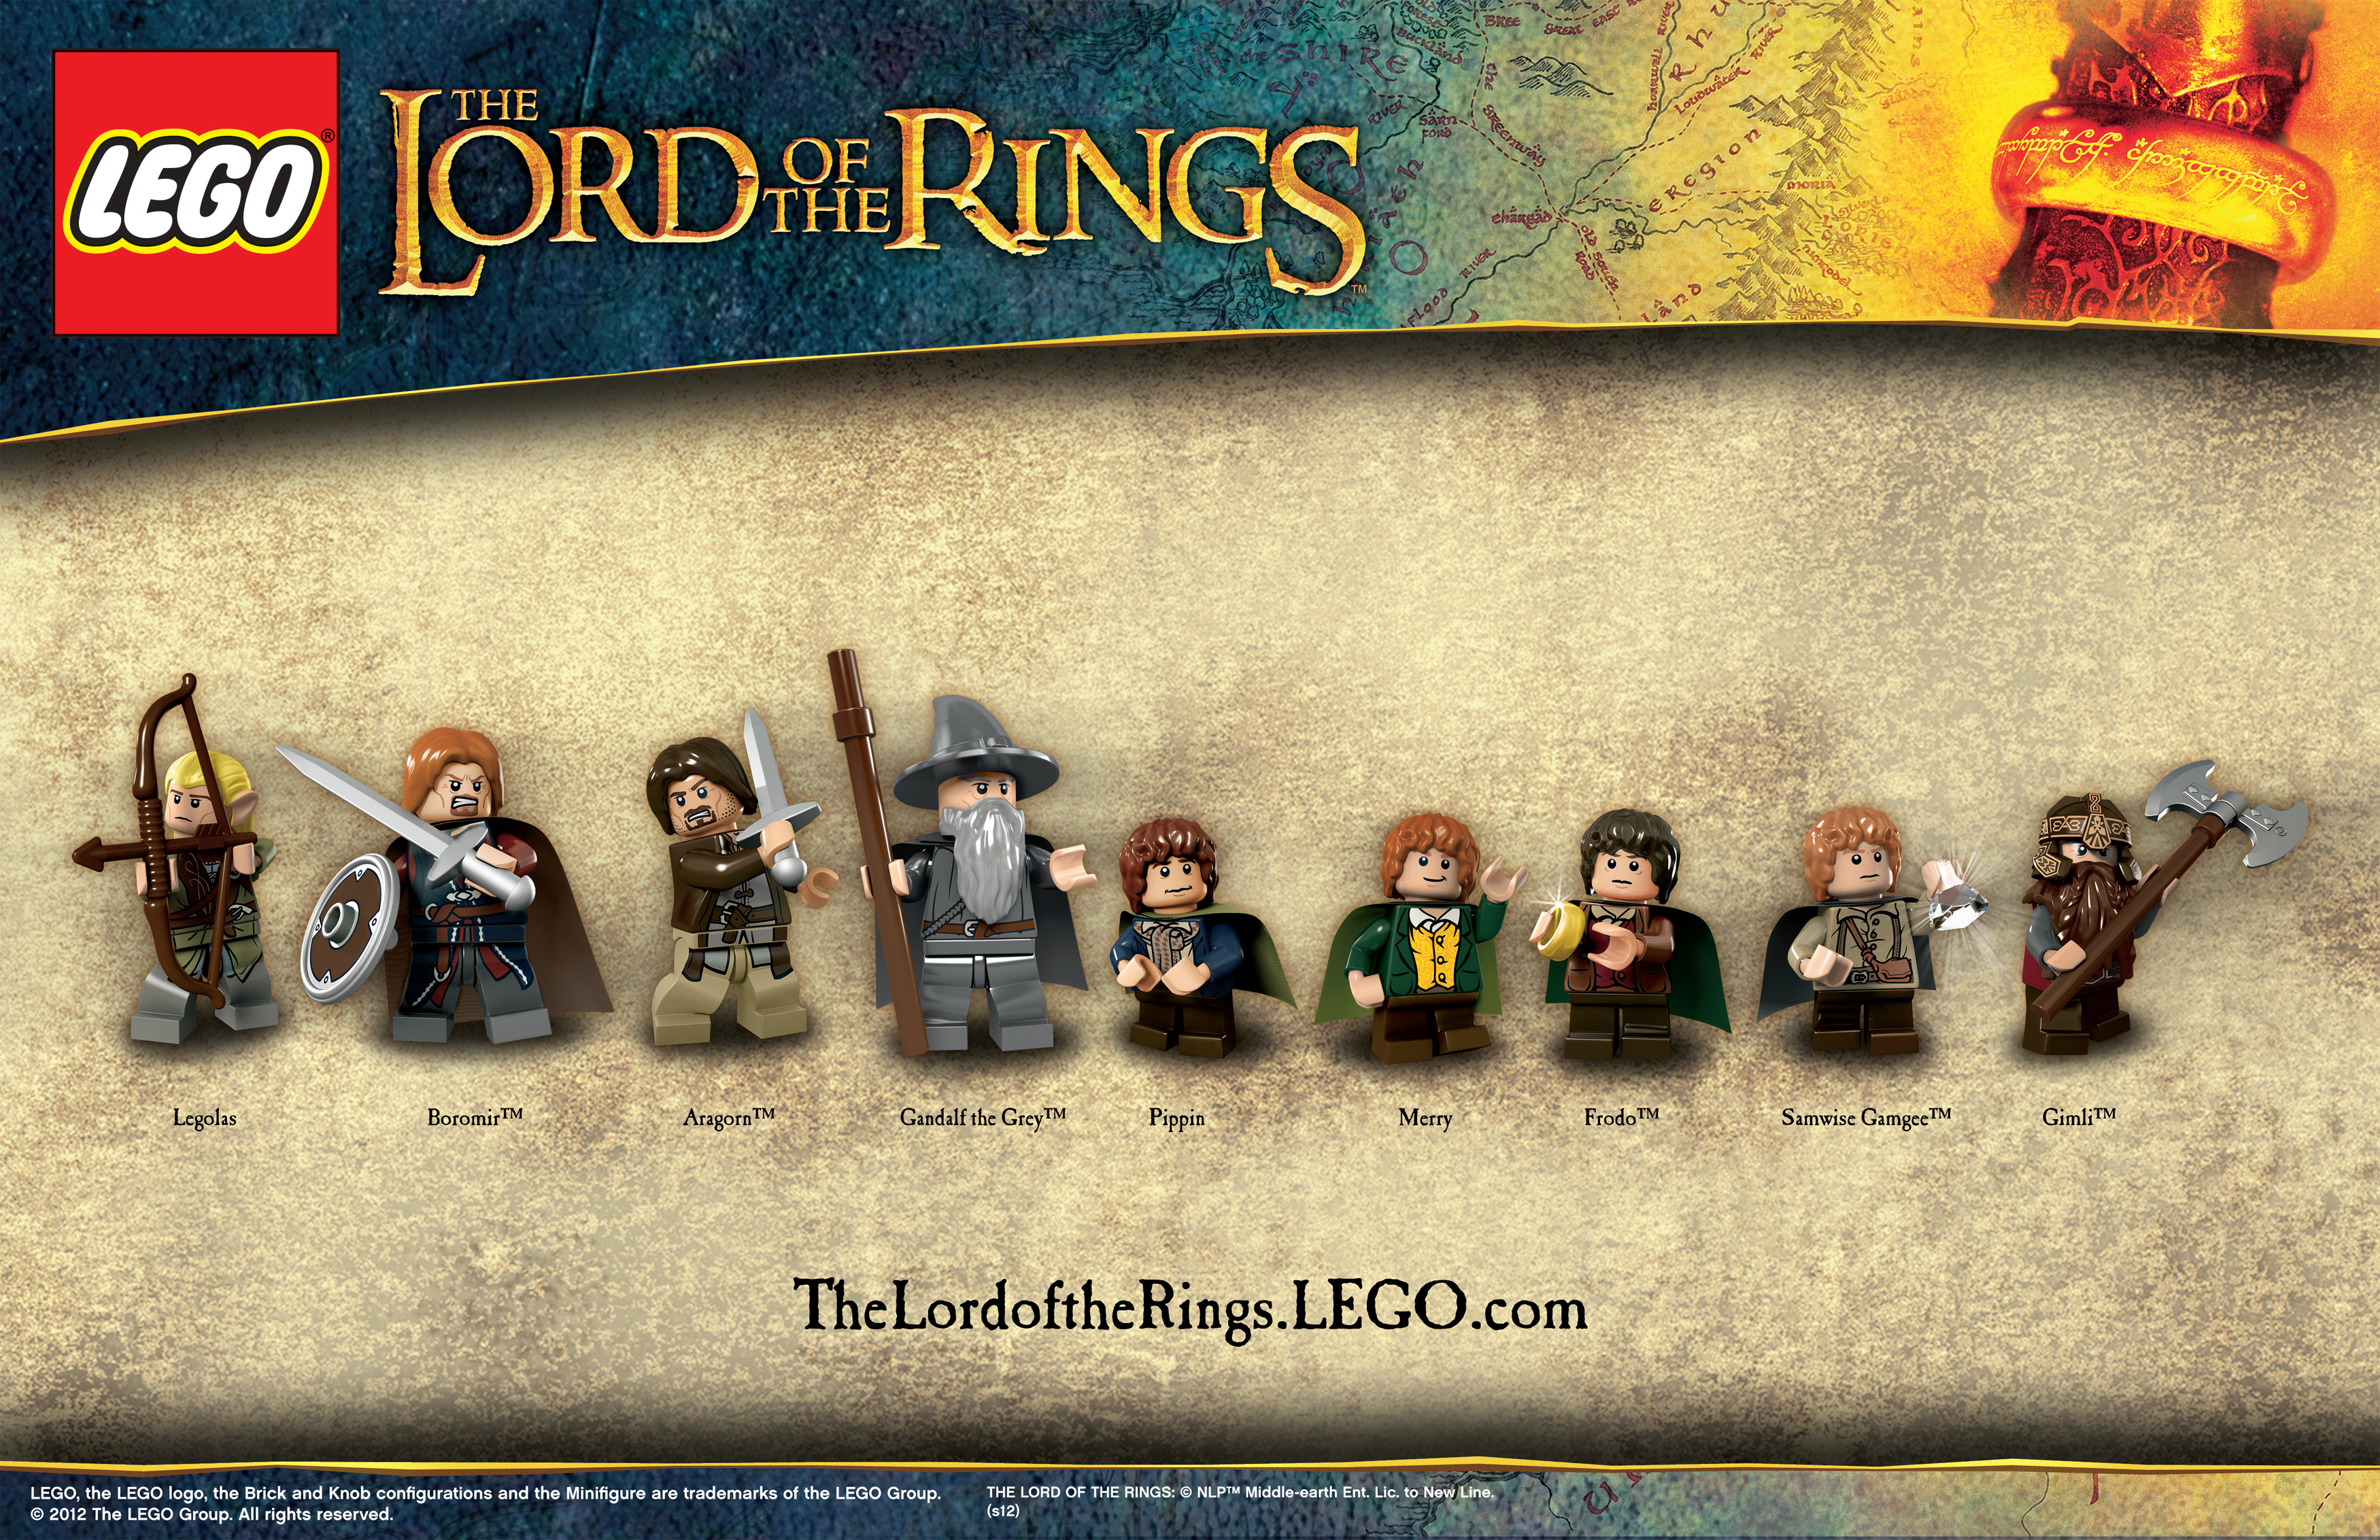 Lego-lord-of-the-rings-character-lineup-image-1-600x387.jpg